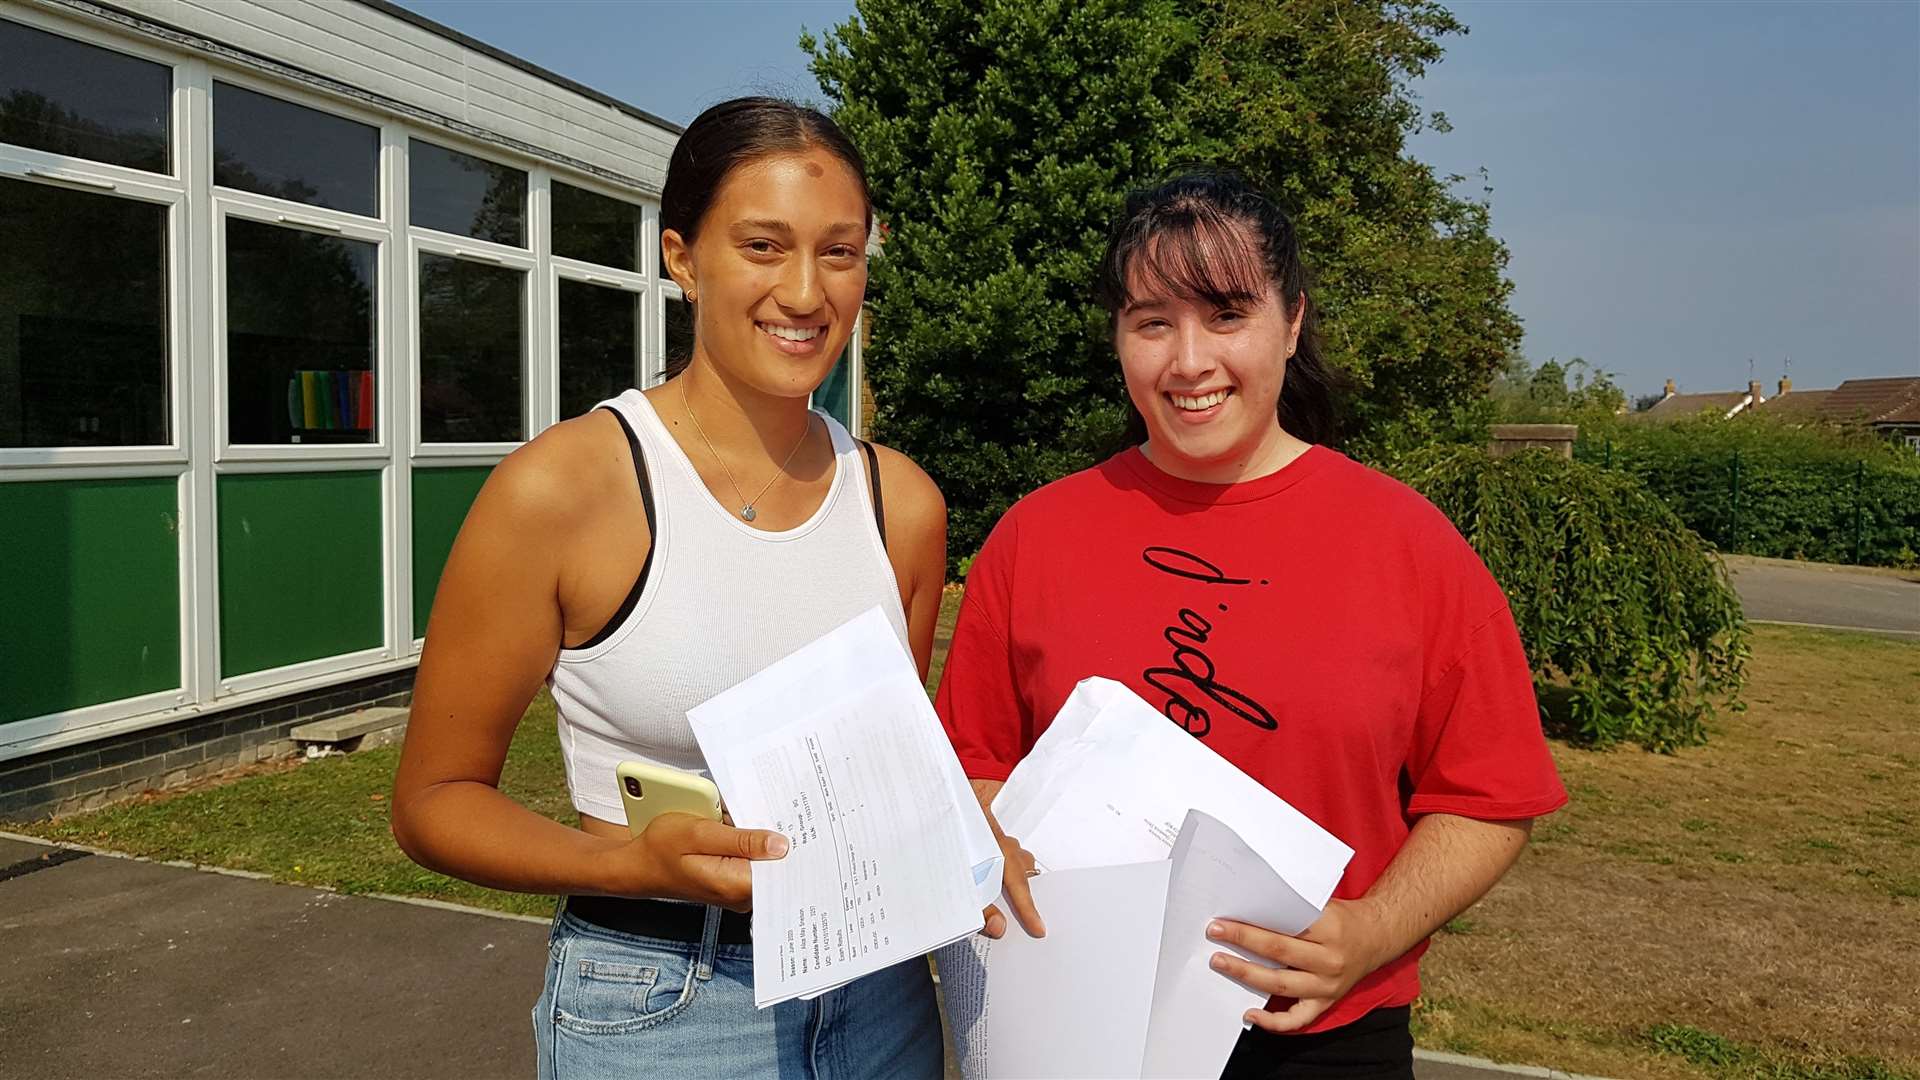 St Anselm's pupils Alice Snelson (left) who achieved A*AA and will study architecture at Bath, and Jessica Newton, who achieved BBC and will study law at the University of Kent